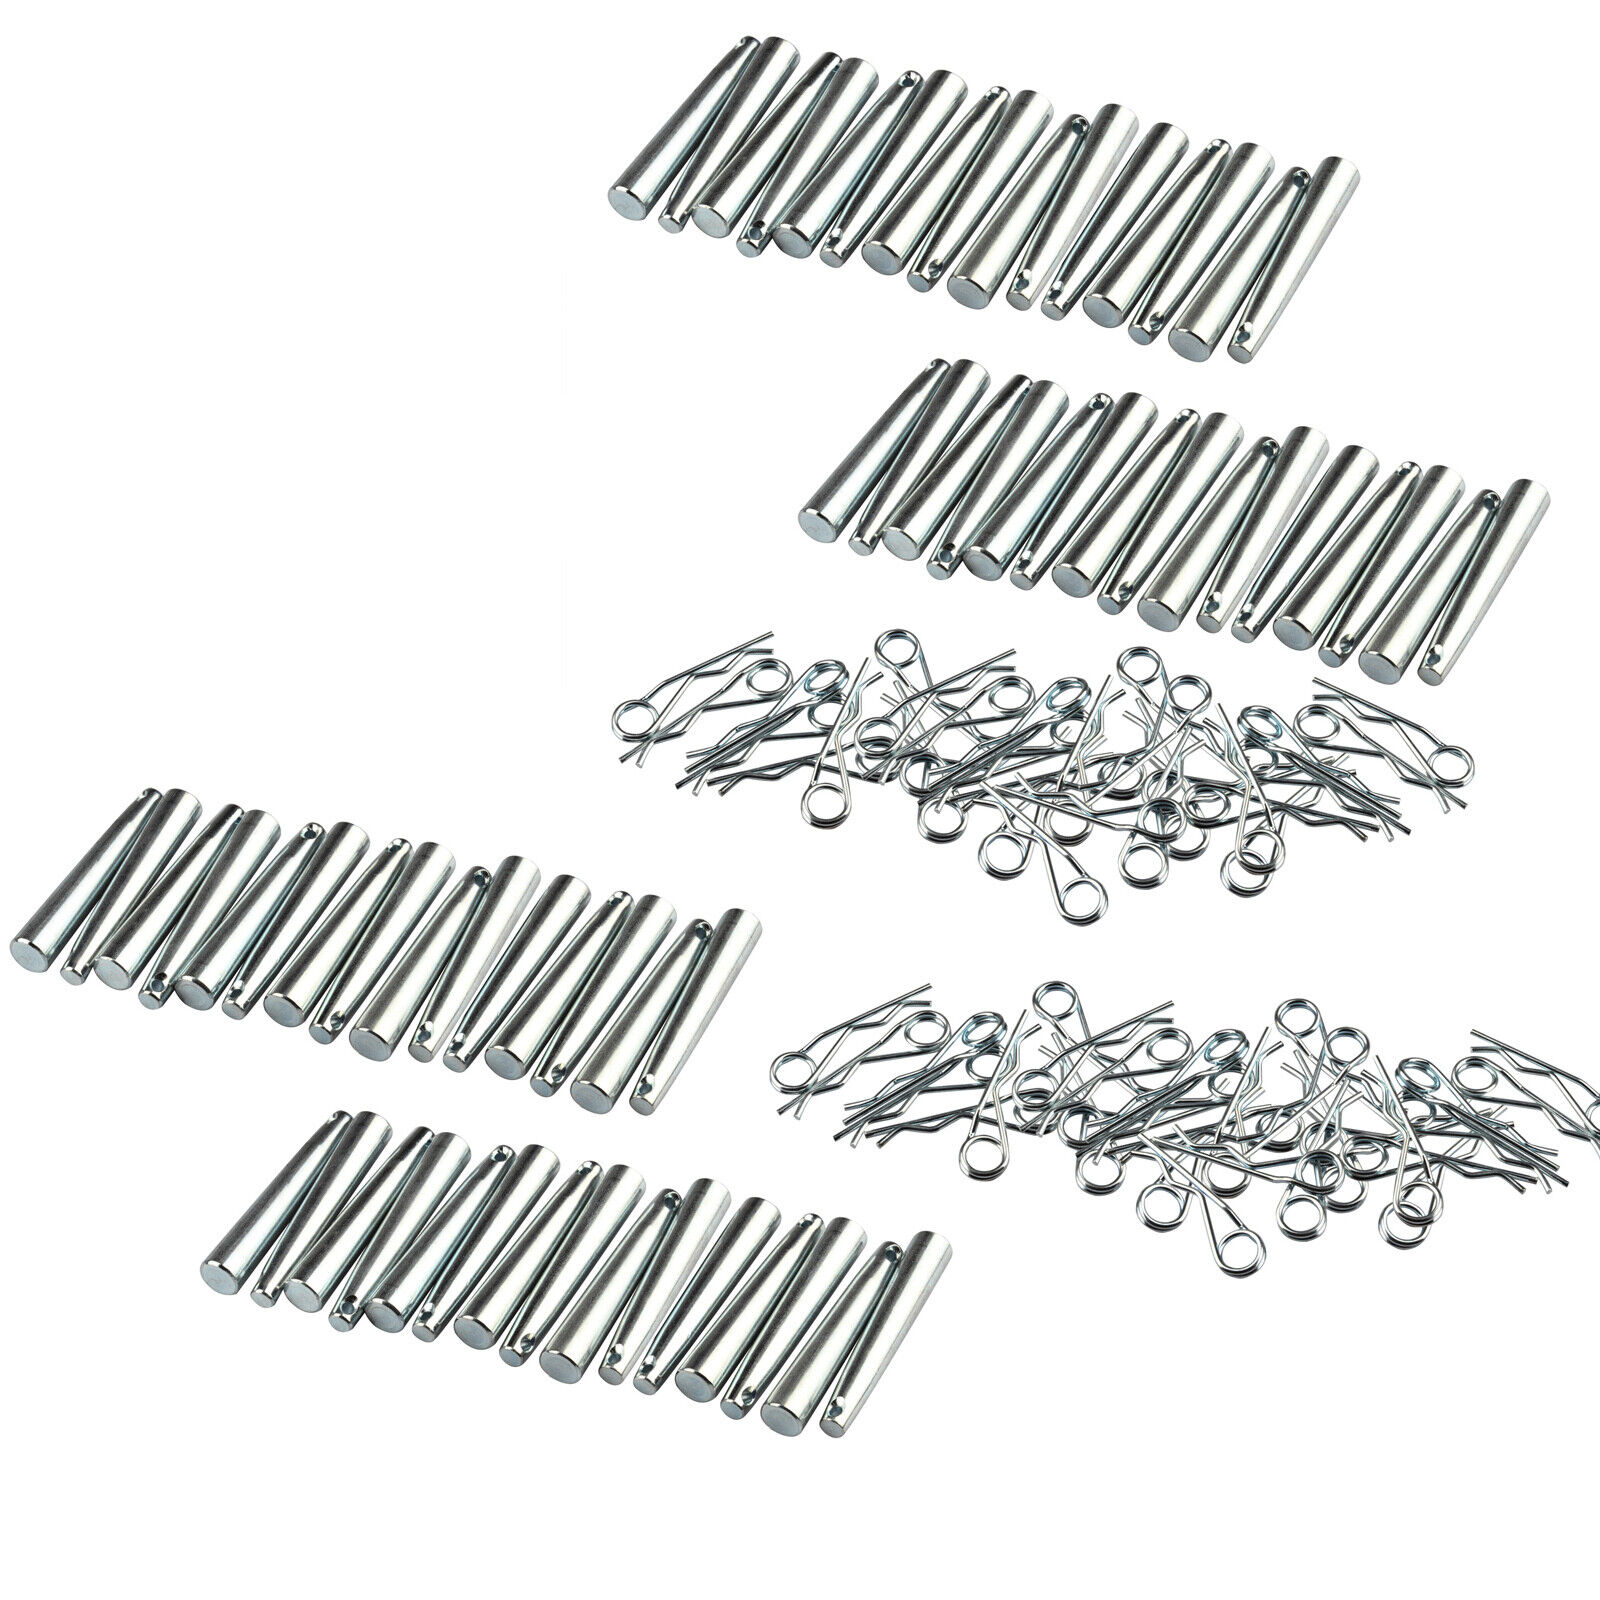 60Pcs Aluminum Conical Coupler Pins with R-Clip Truss Accessories 2.7 inch Pin Unbranded Does not apply